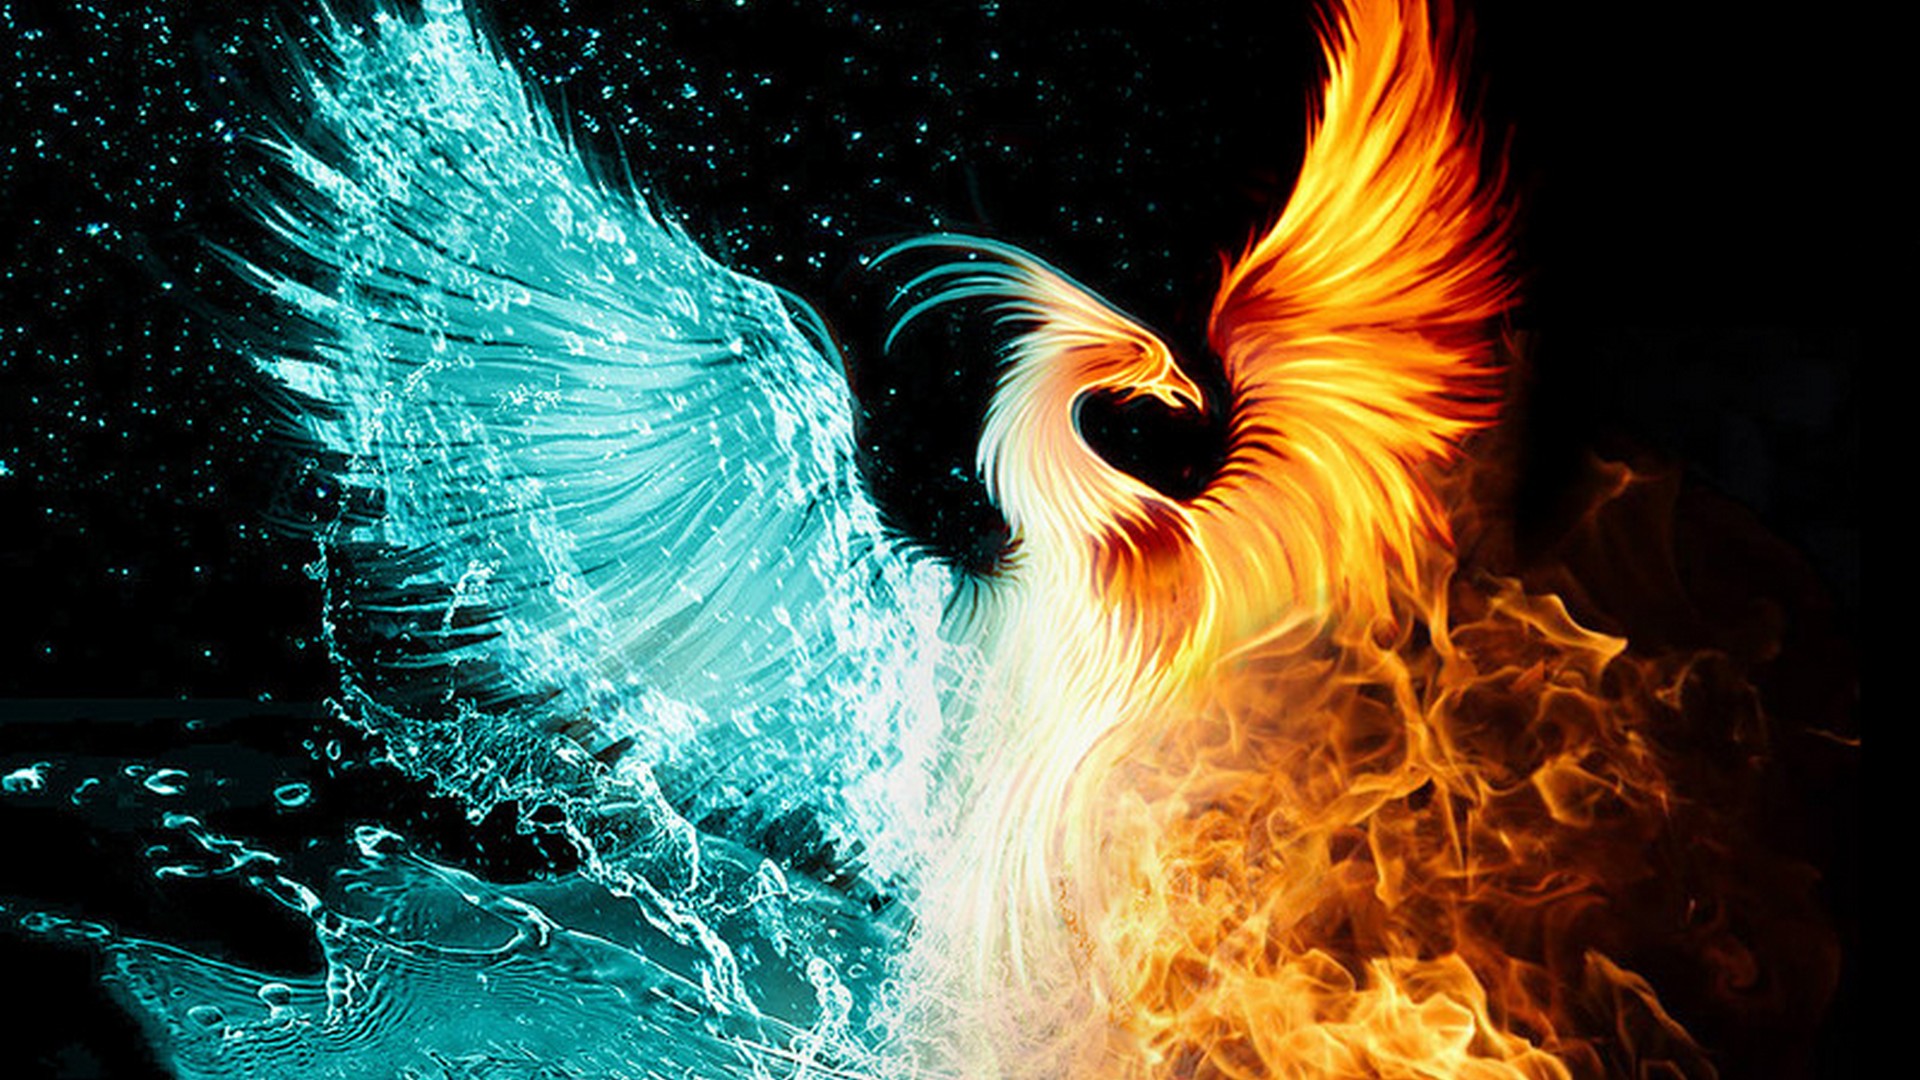 Wallpaper Phoenix Bird with image resolution 1920x1080 pixel. You can use this wallpaper as background for your desktop Computer Screensavers, Android or iPhone smartphones